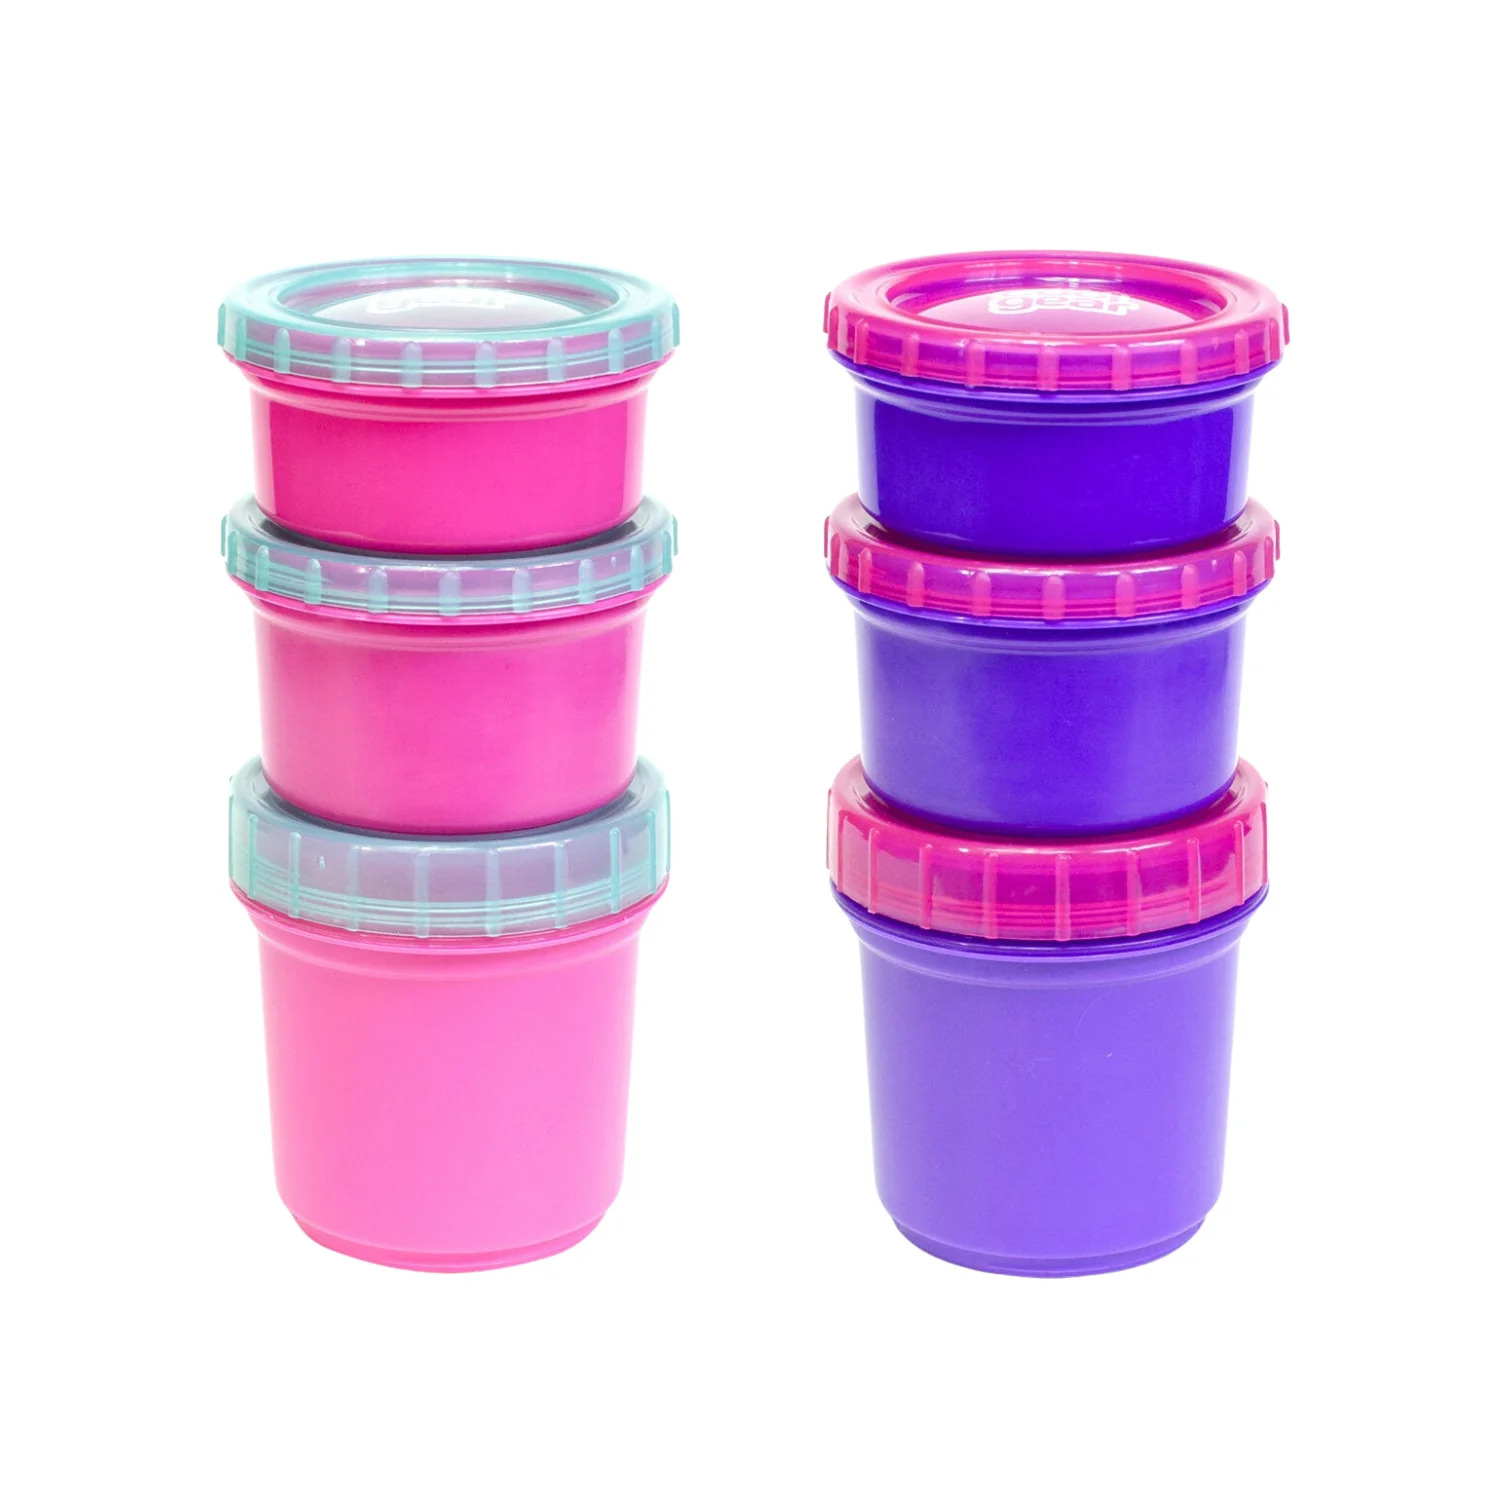 Cool Gear 2-Pack Kids Stackable Snack Snap Containers with Freezer Gel | 3 Reusable Food Containers With Twist Off Lids | Double Insulated with Freezer Gel To Keep Food Cold - Pink/Purple - image 1 of 5